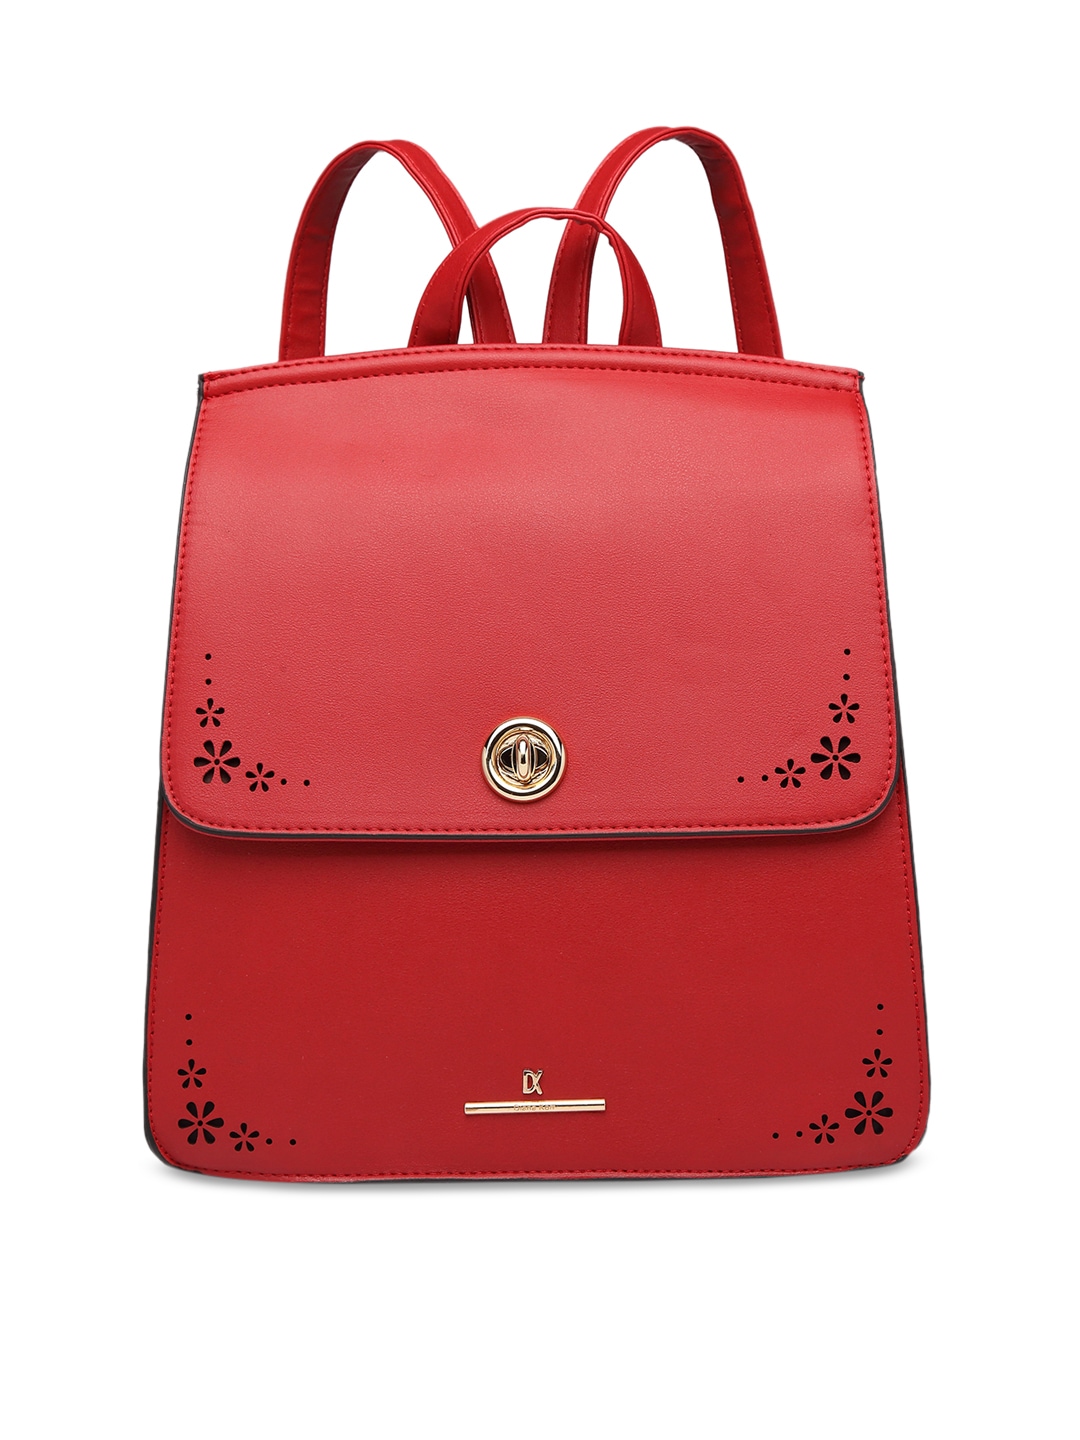 Diana Korr Women Red Solid Backpack Price in India